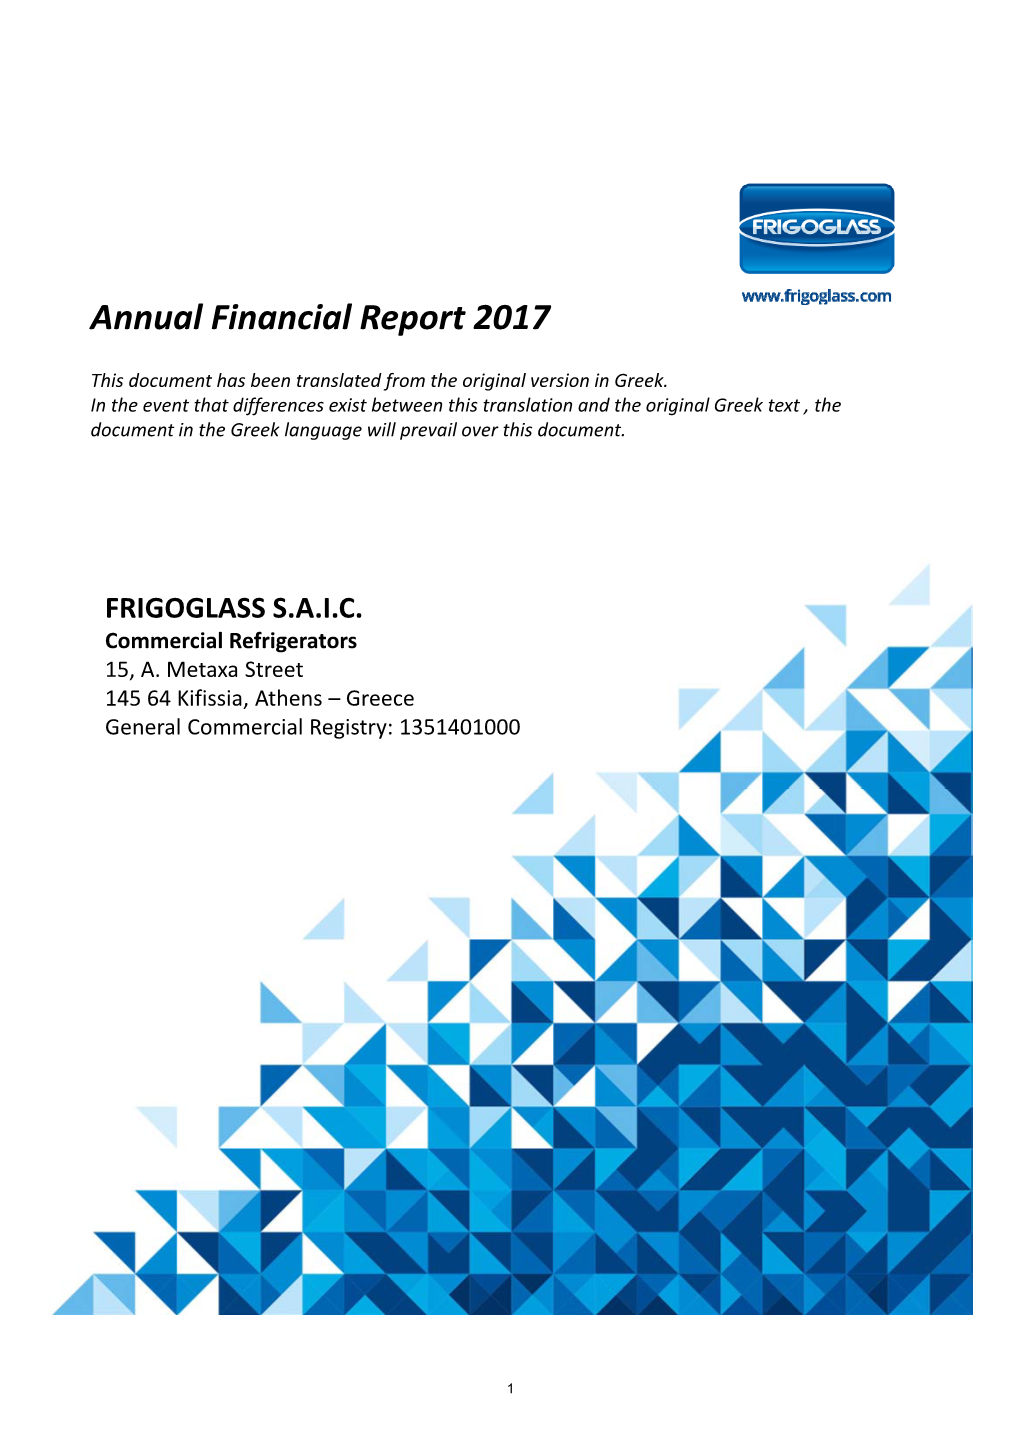 Annual Financial Report 2017